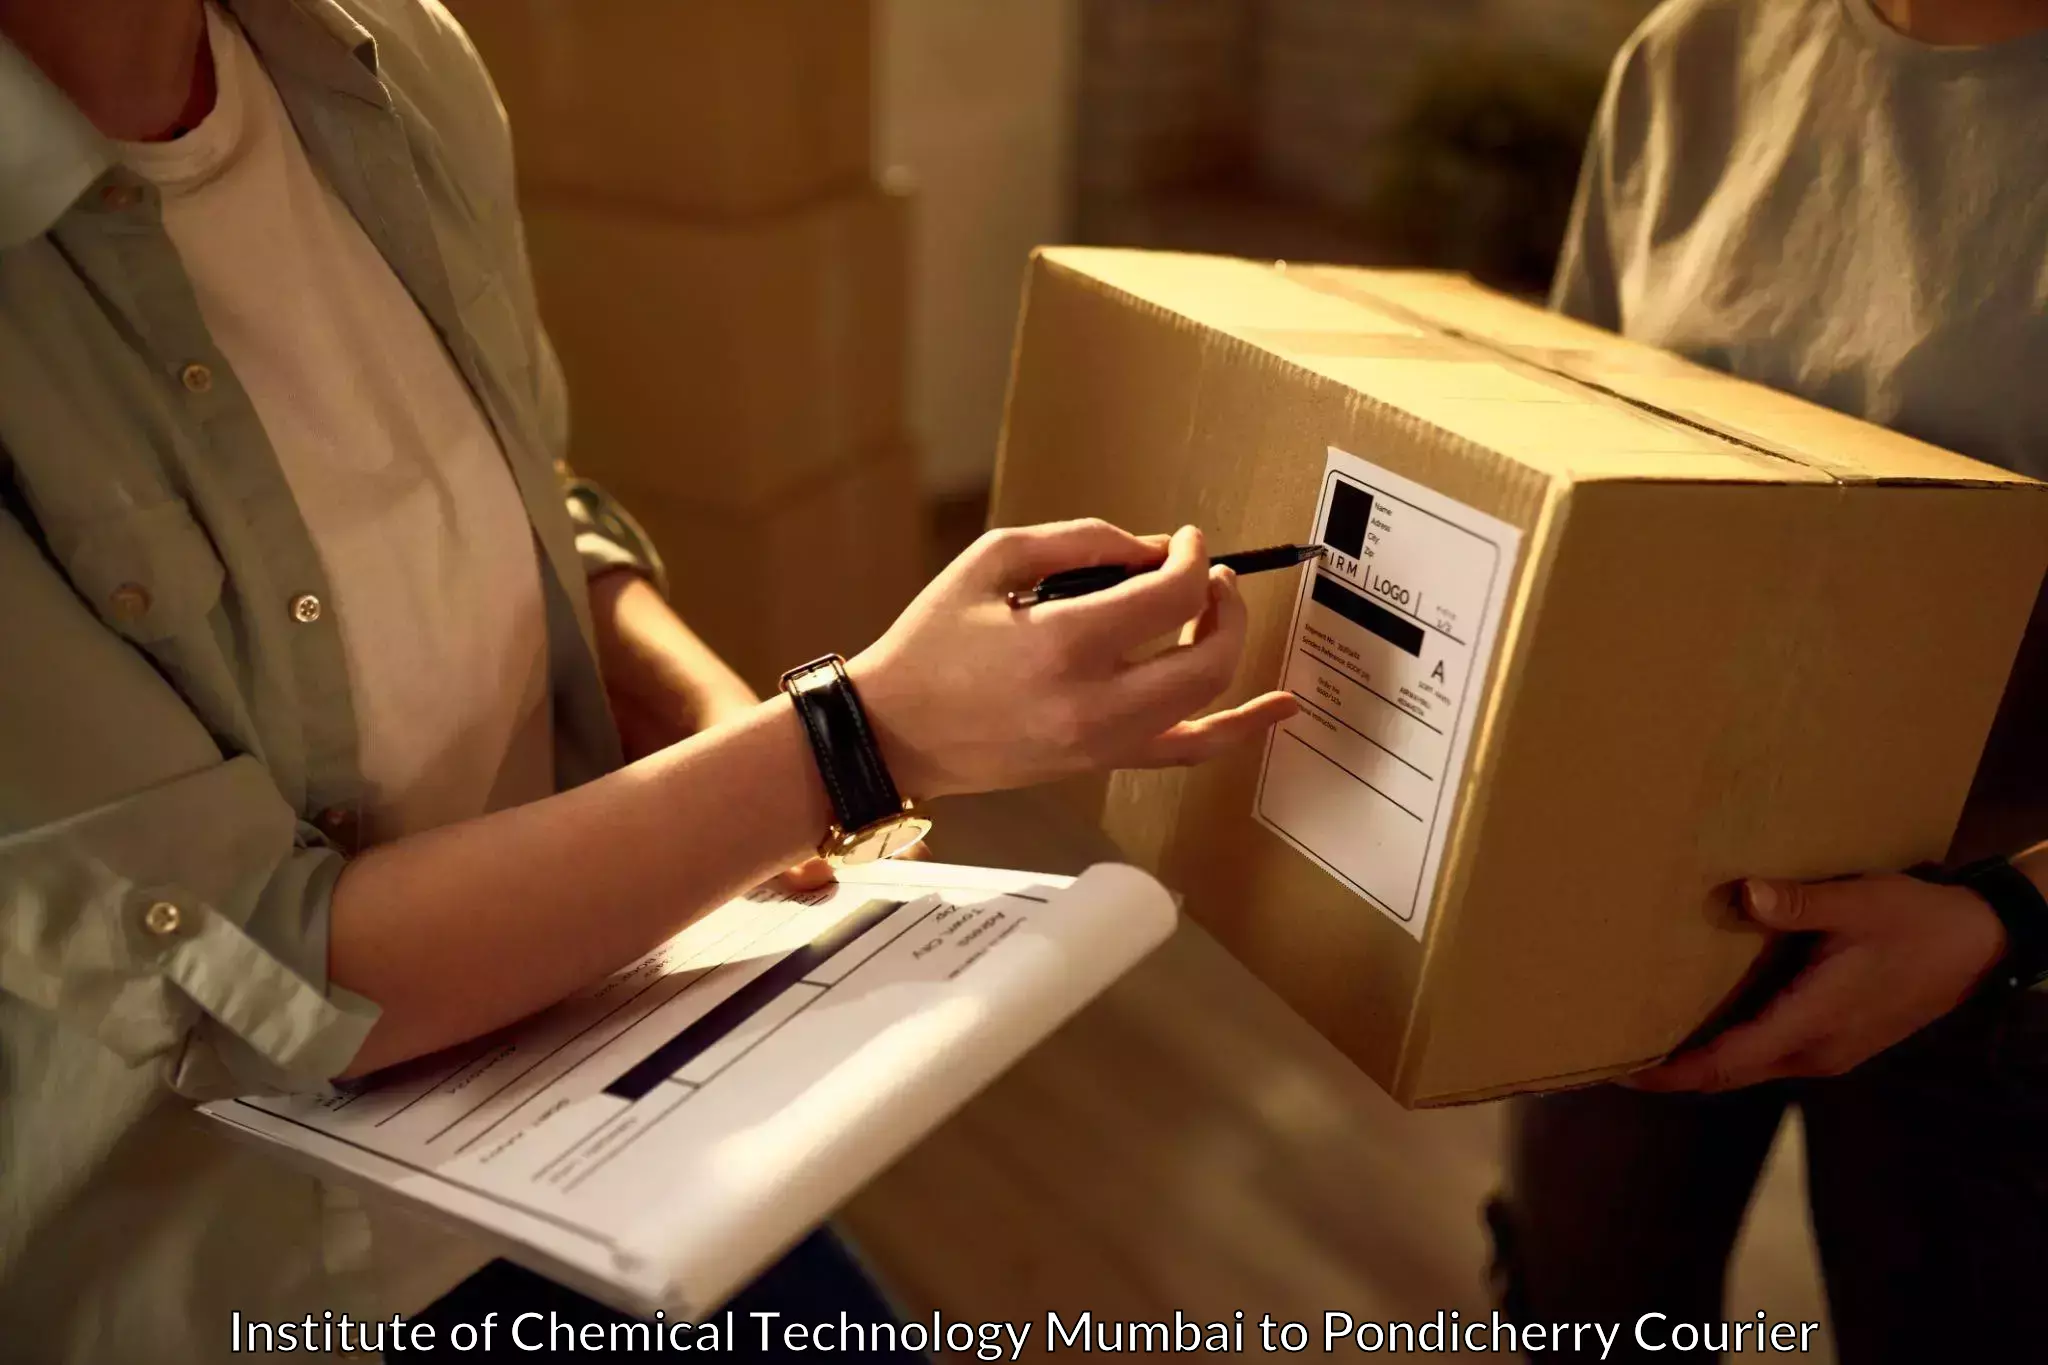 Professional courier handling Institute of Chemical Technology Mumbai to Pondicherry